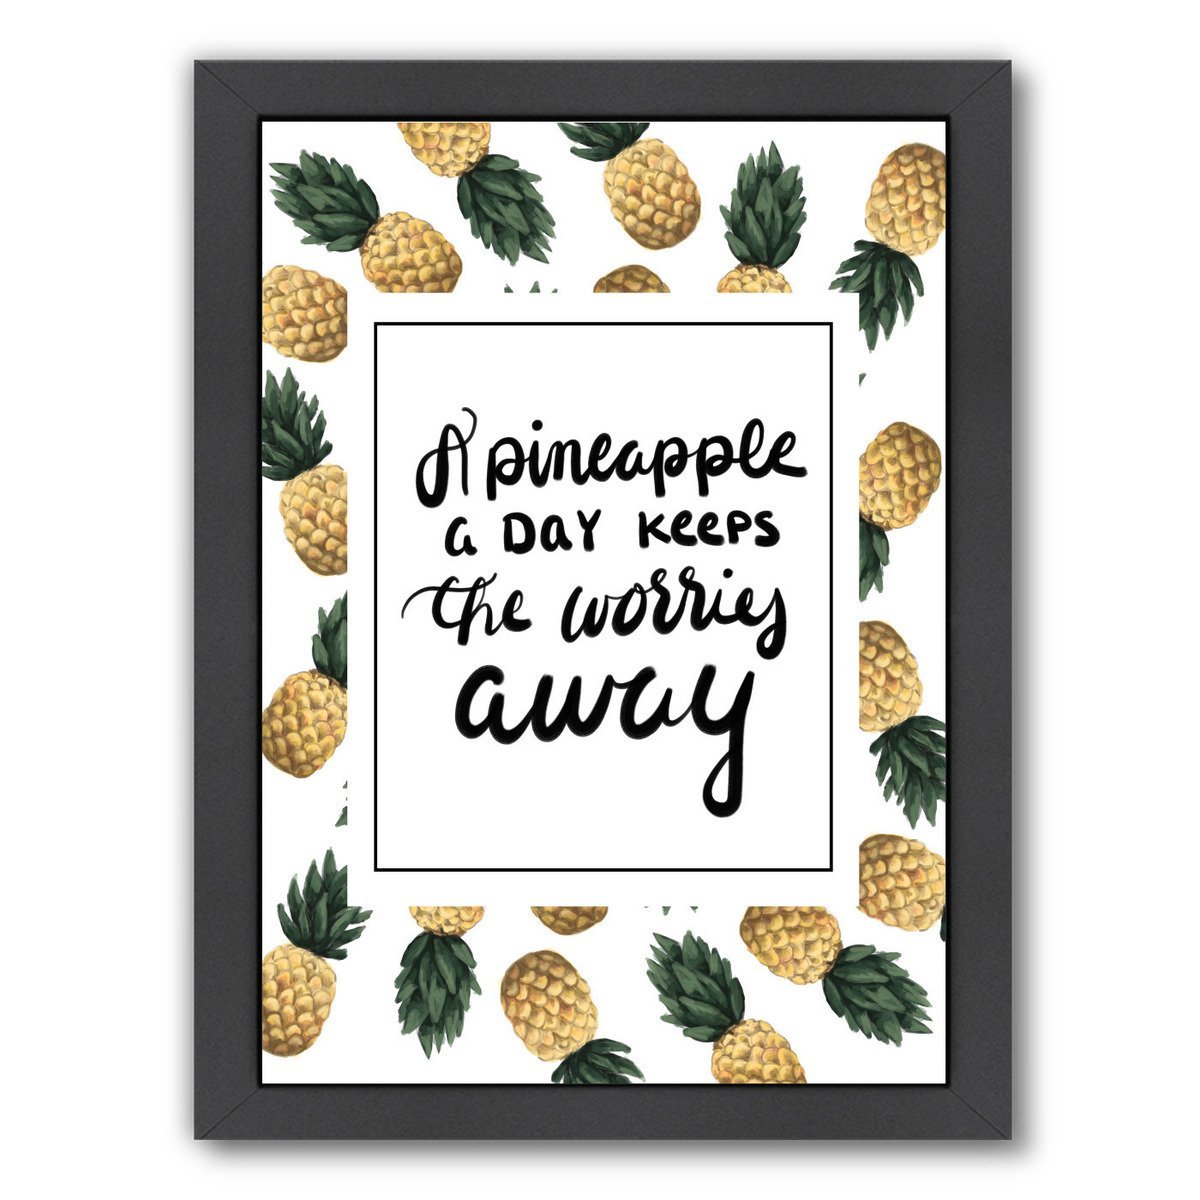 A Pineapple A Day Keeps The Worries Away by Jetty Printables Framed Print - Americanflat